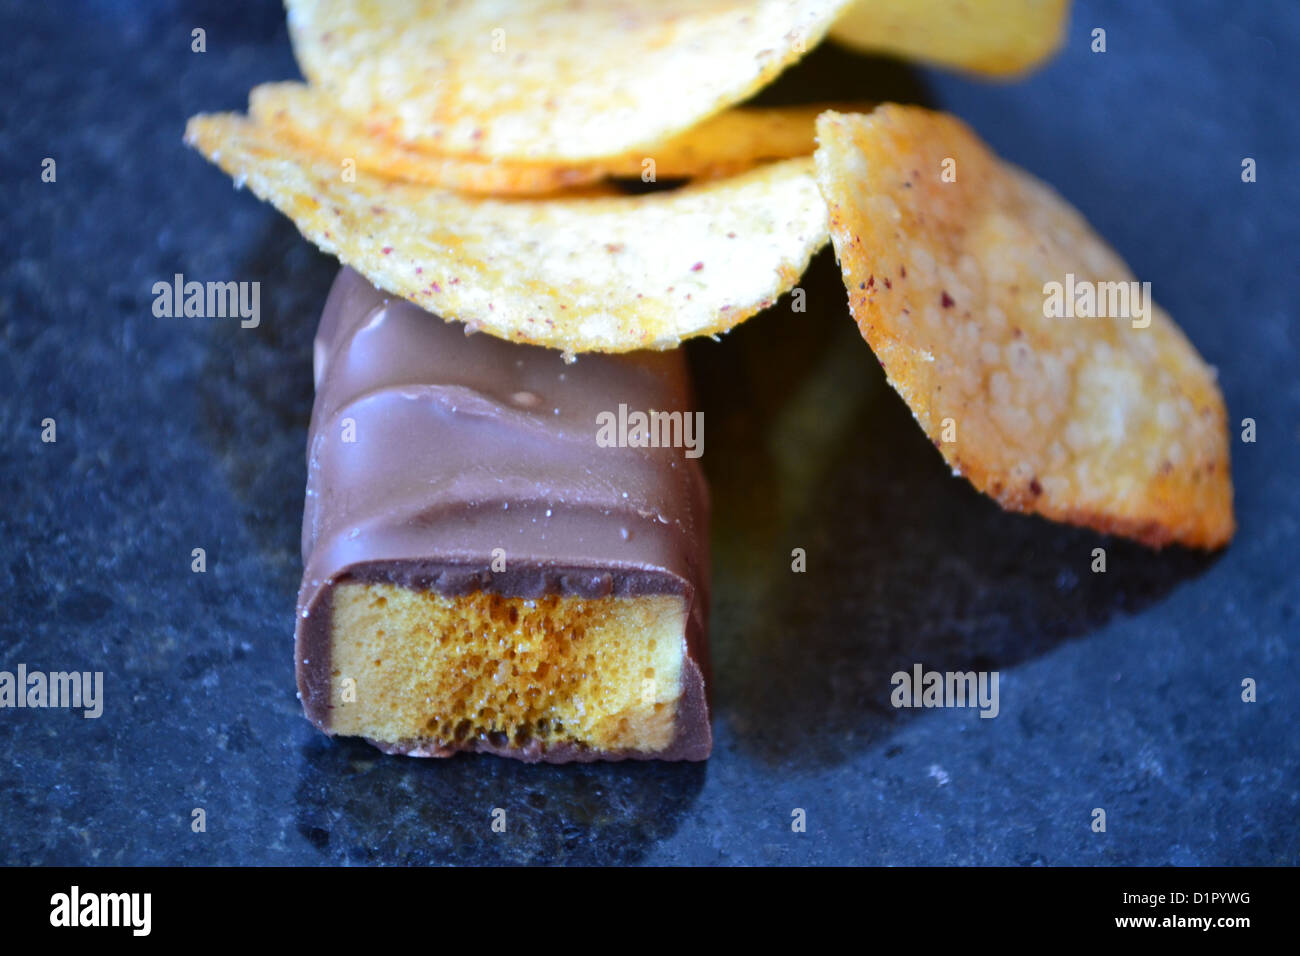 Chocolate with a side order of chips. Stock Photo